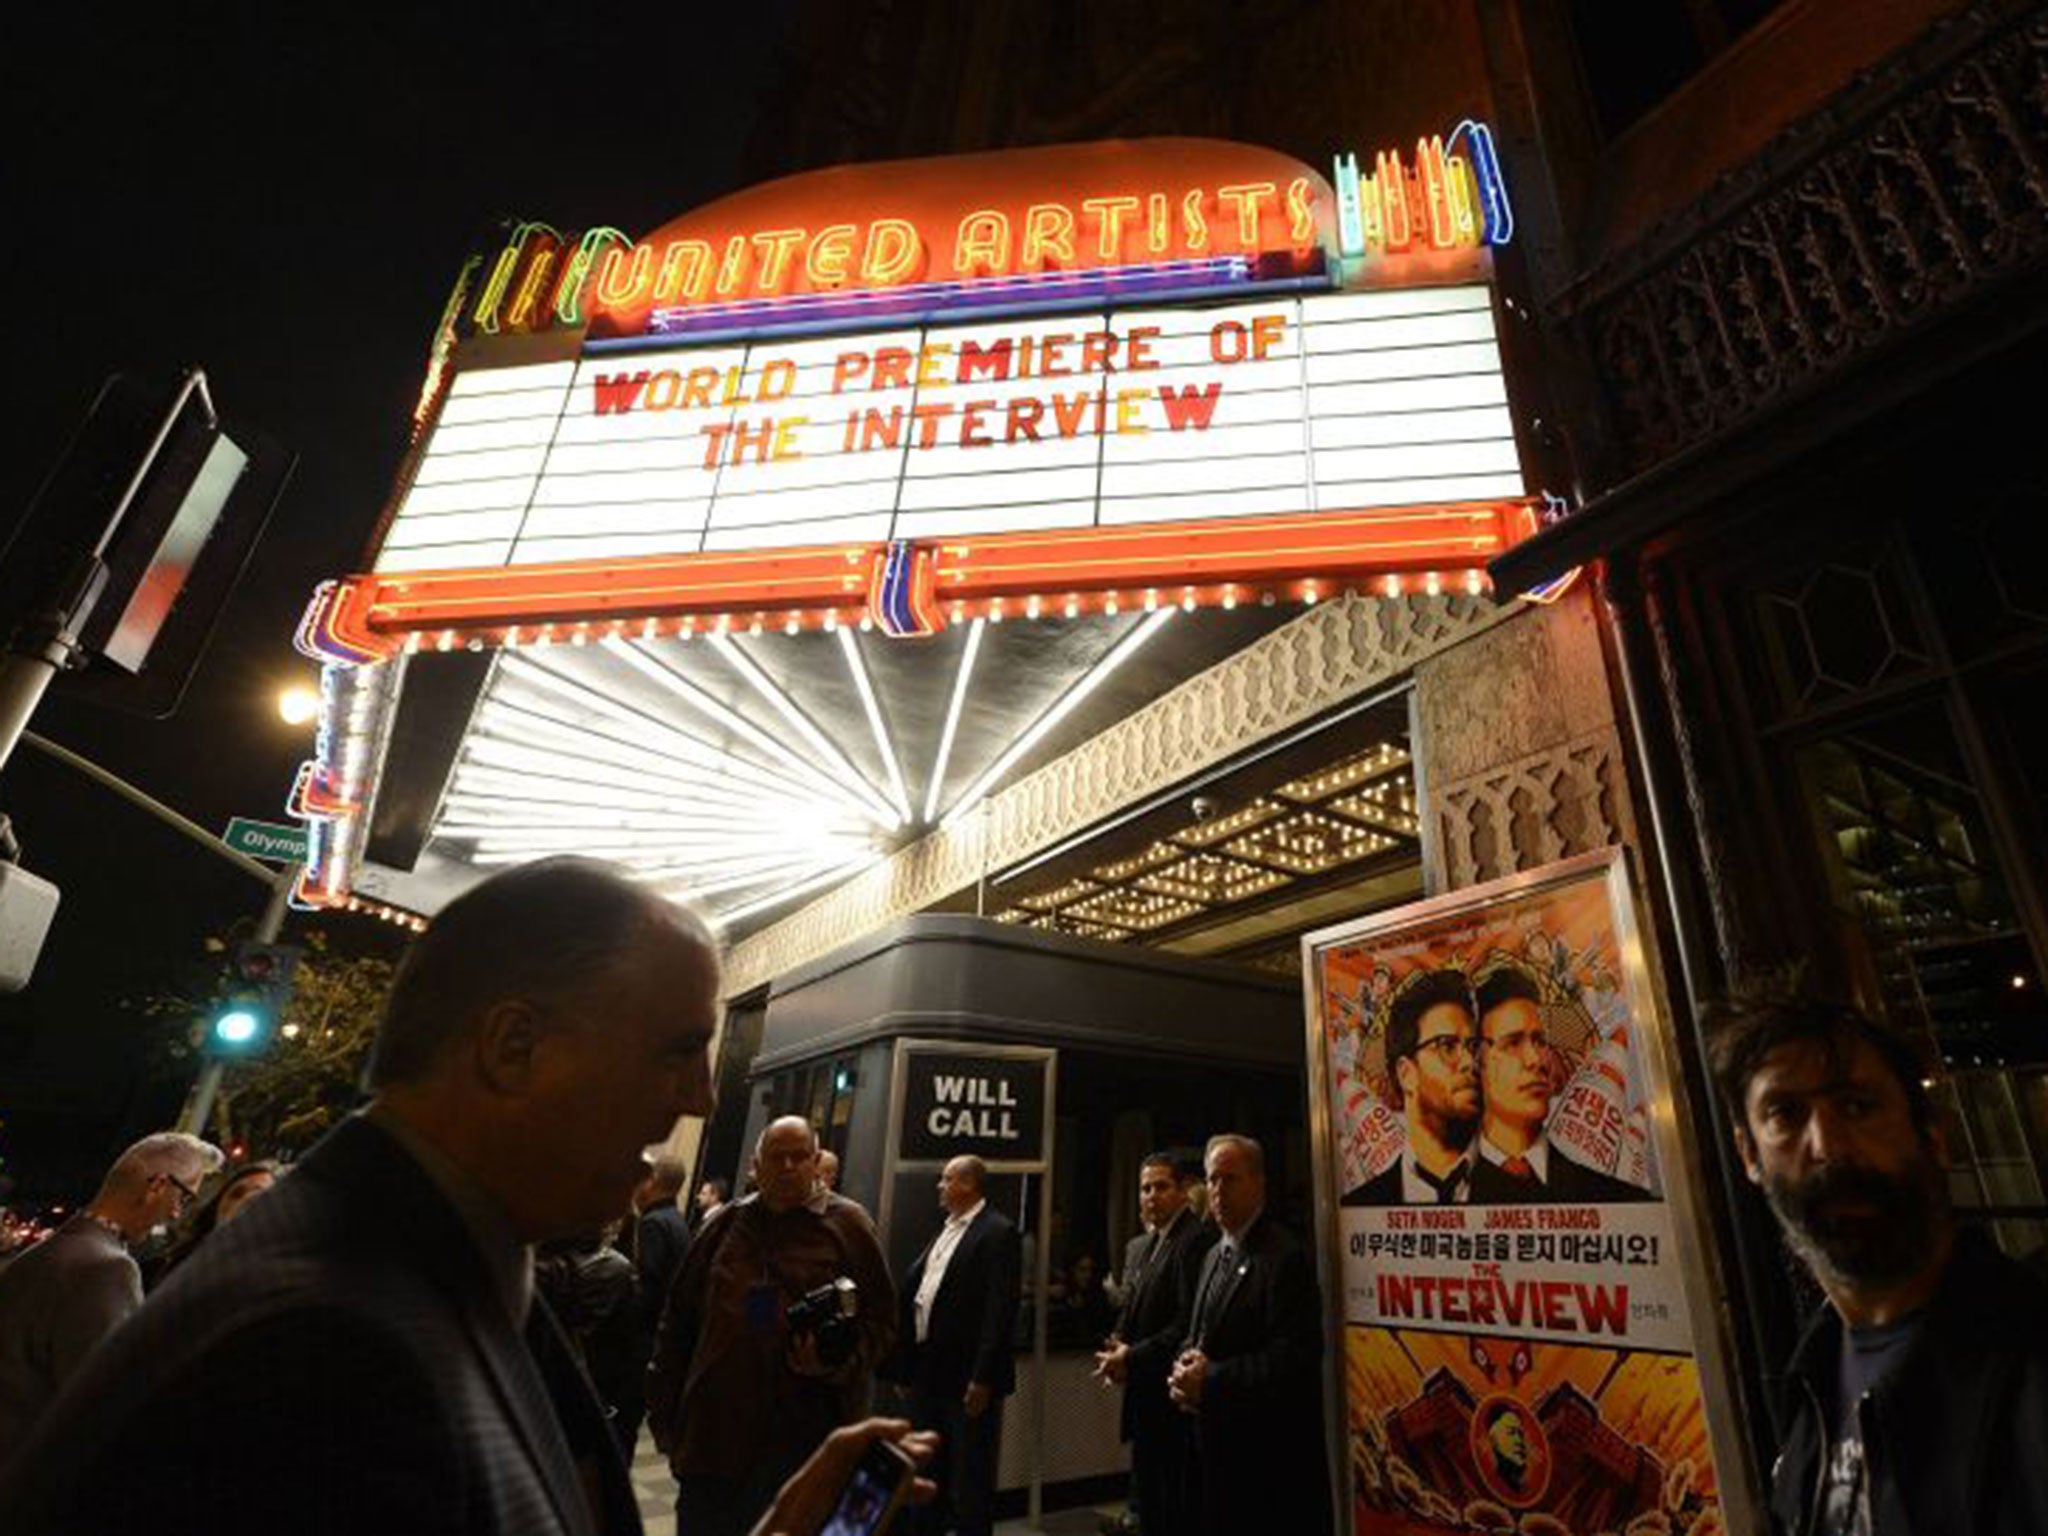 Heavy security surrounds the entrance of United Artists theater during the premiere of the film "The Interview" in Los Angeles